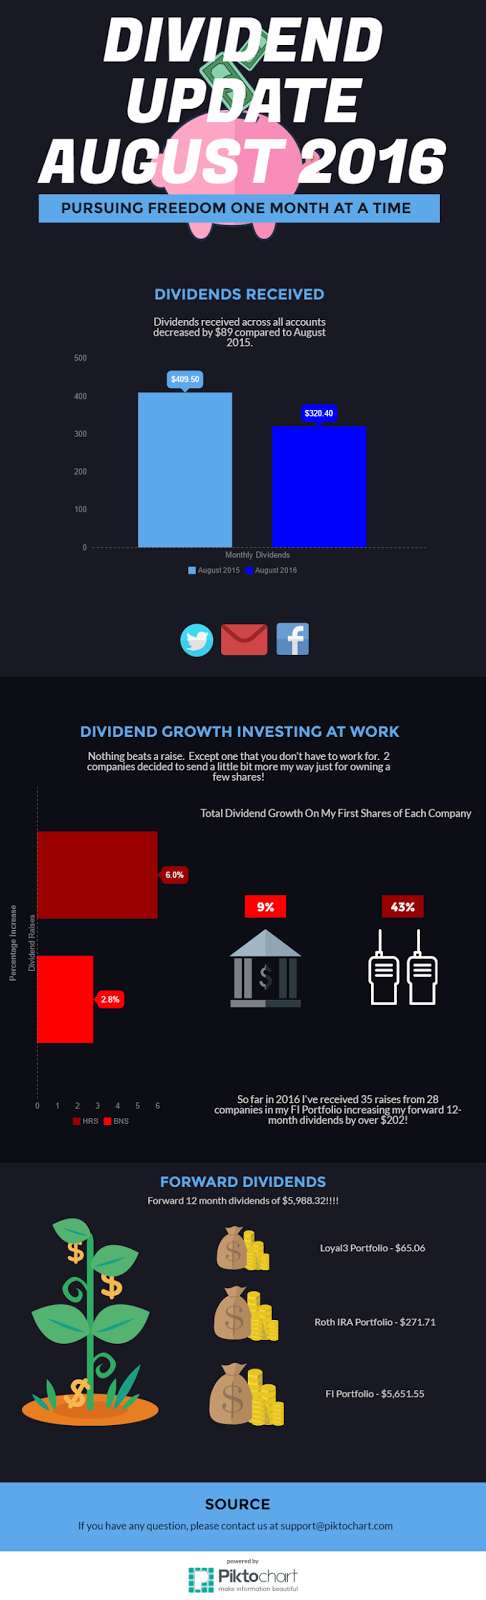 dividend growth investing, dividends, stocks, investing, financial independence